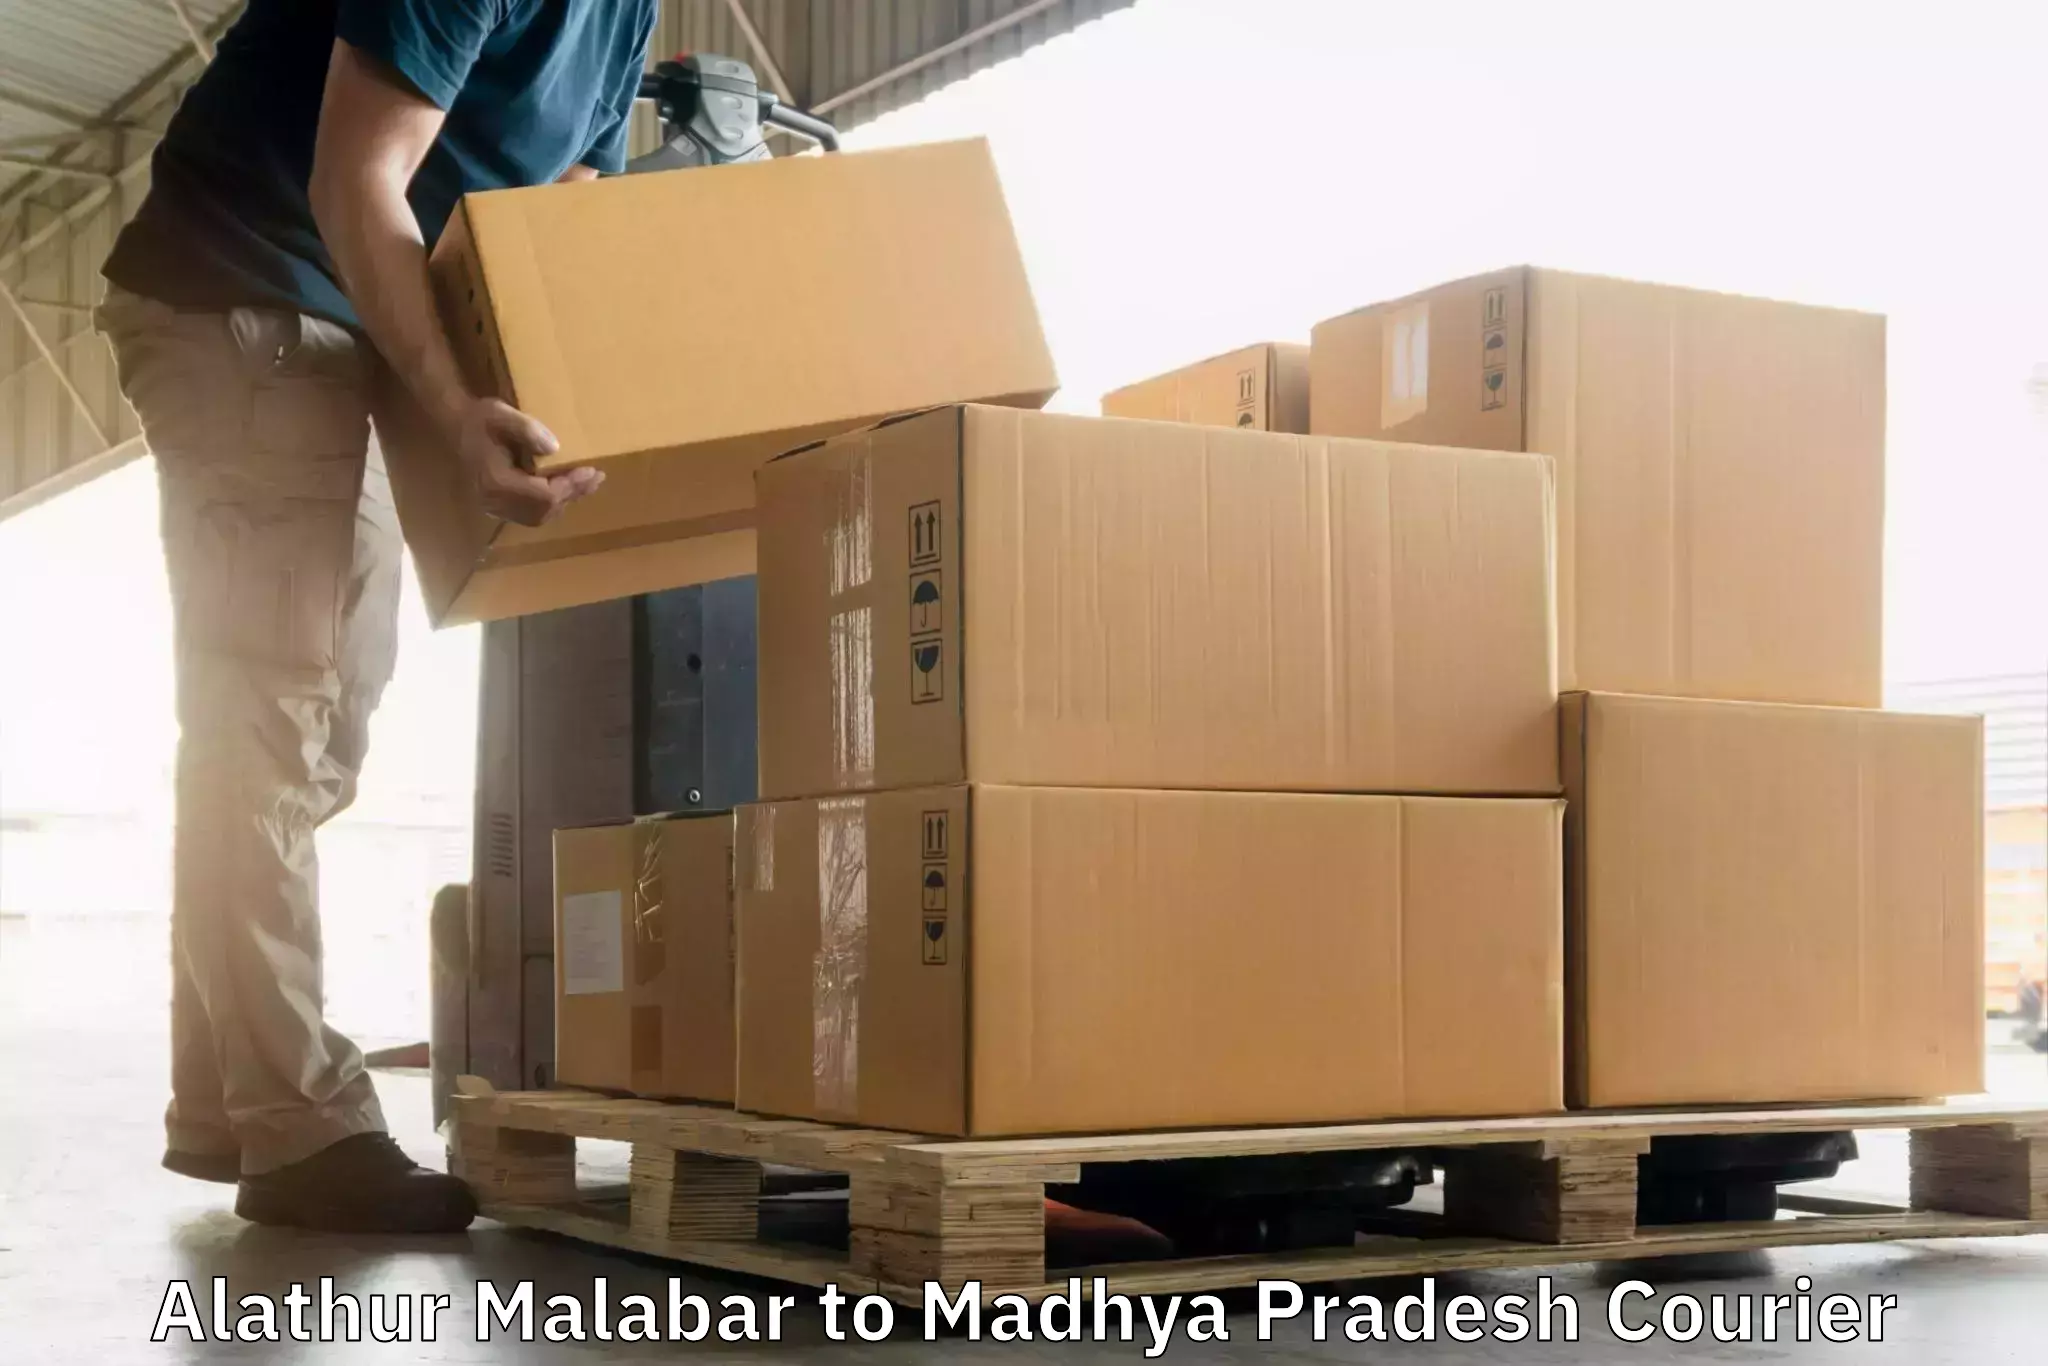 Modern delivery methods Alathur Malabar to Bhind